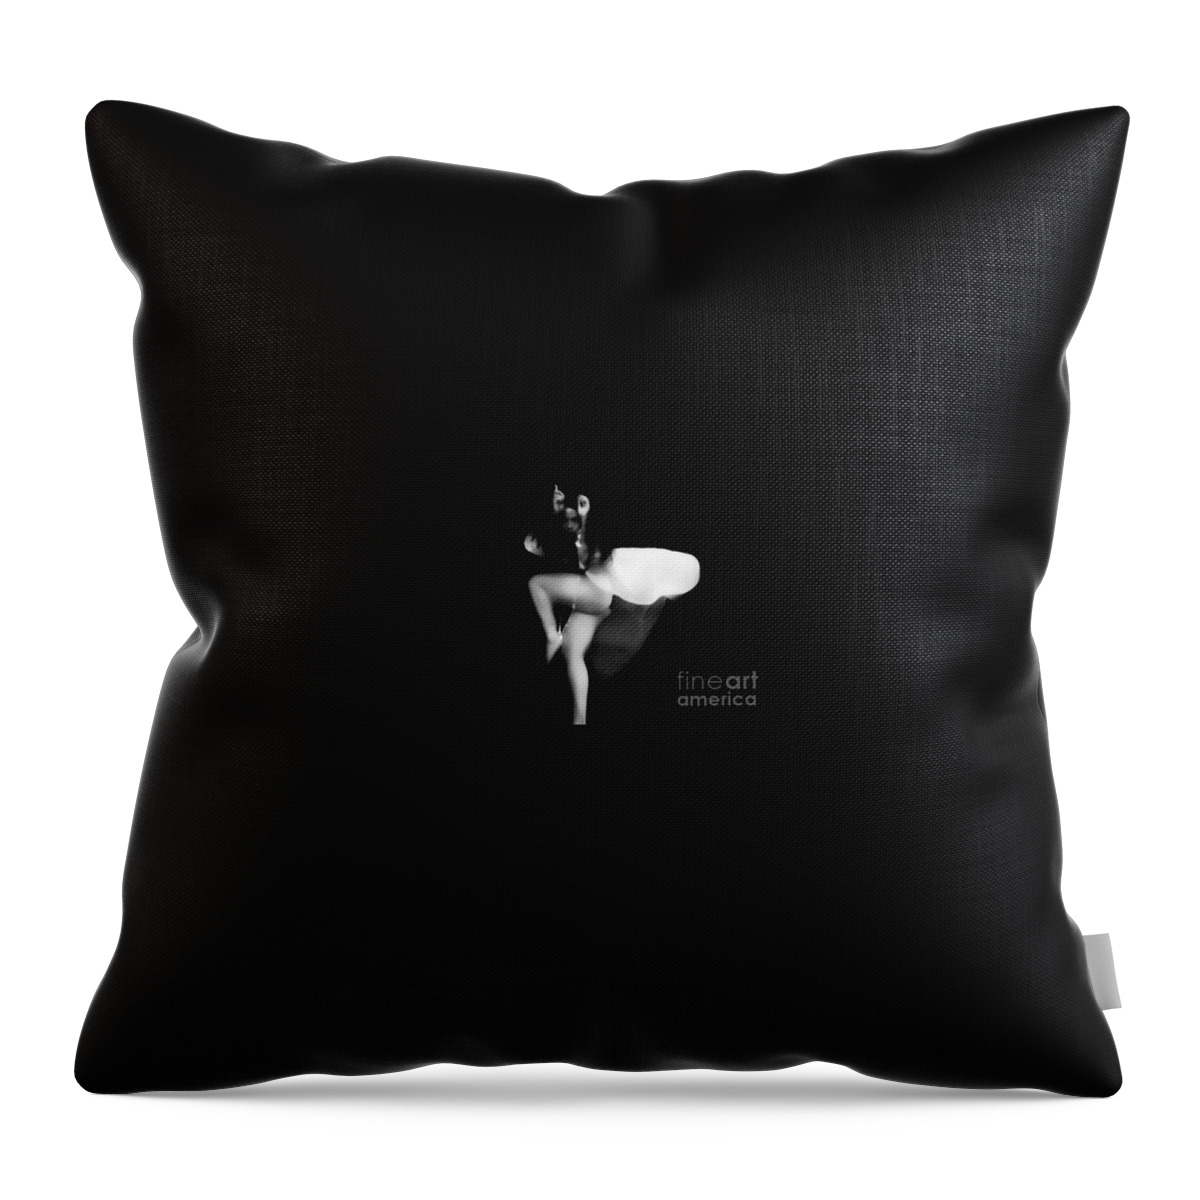  Throw Pillow featuring the photograph Predator by Jessica S